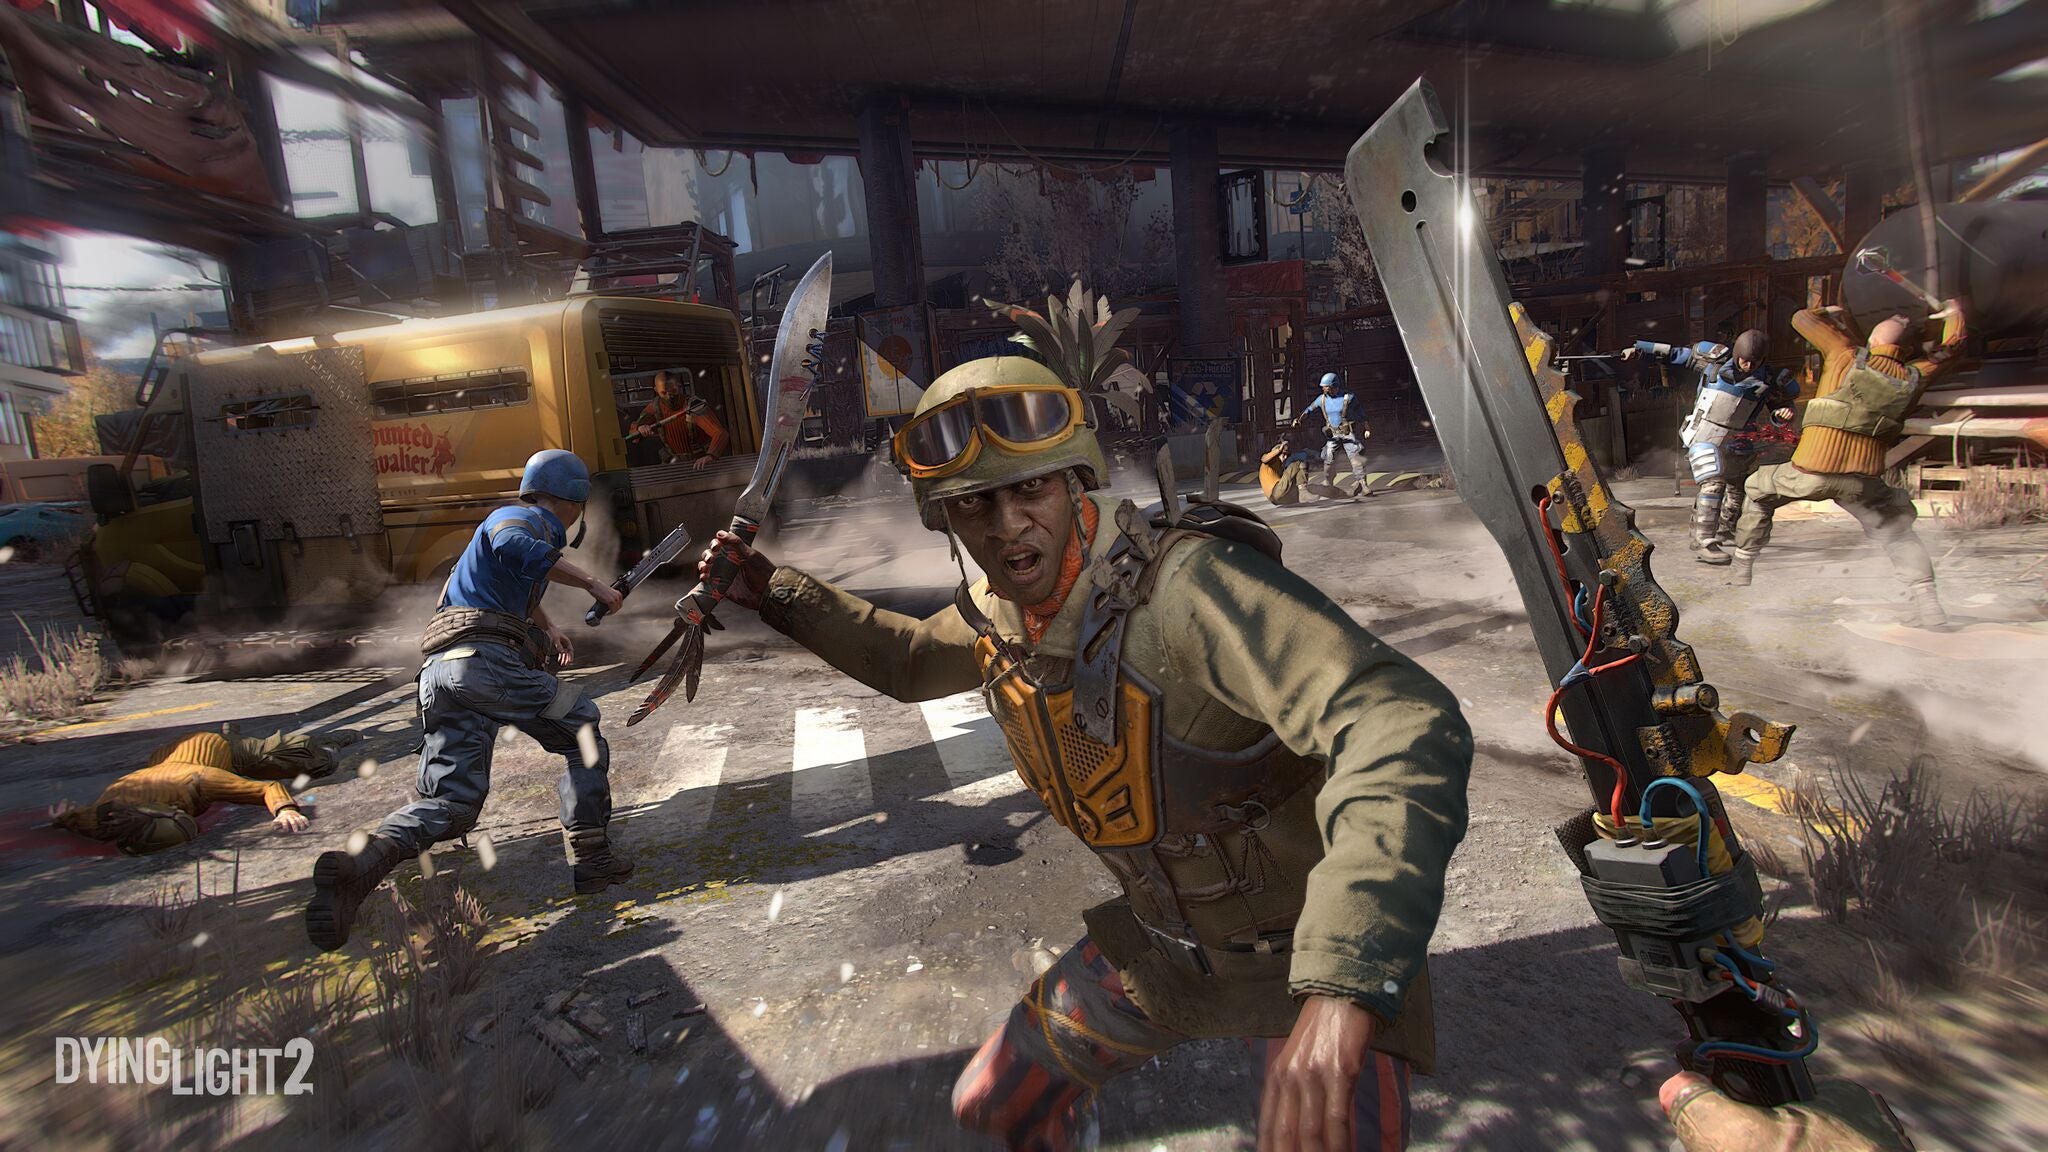 Image for Dying Light 2 has double the number of parkour moves compared to the original game